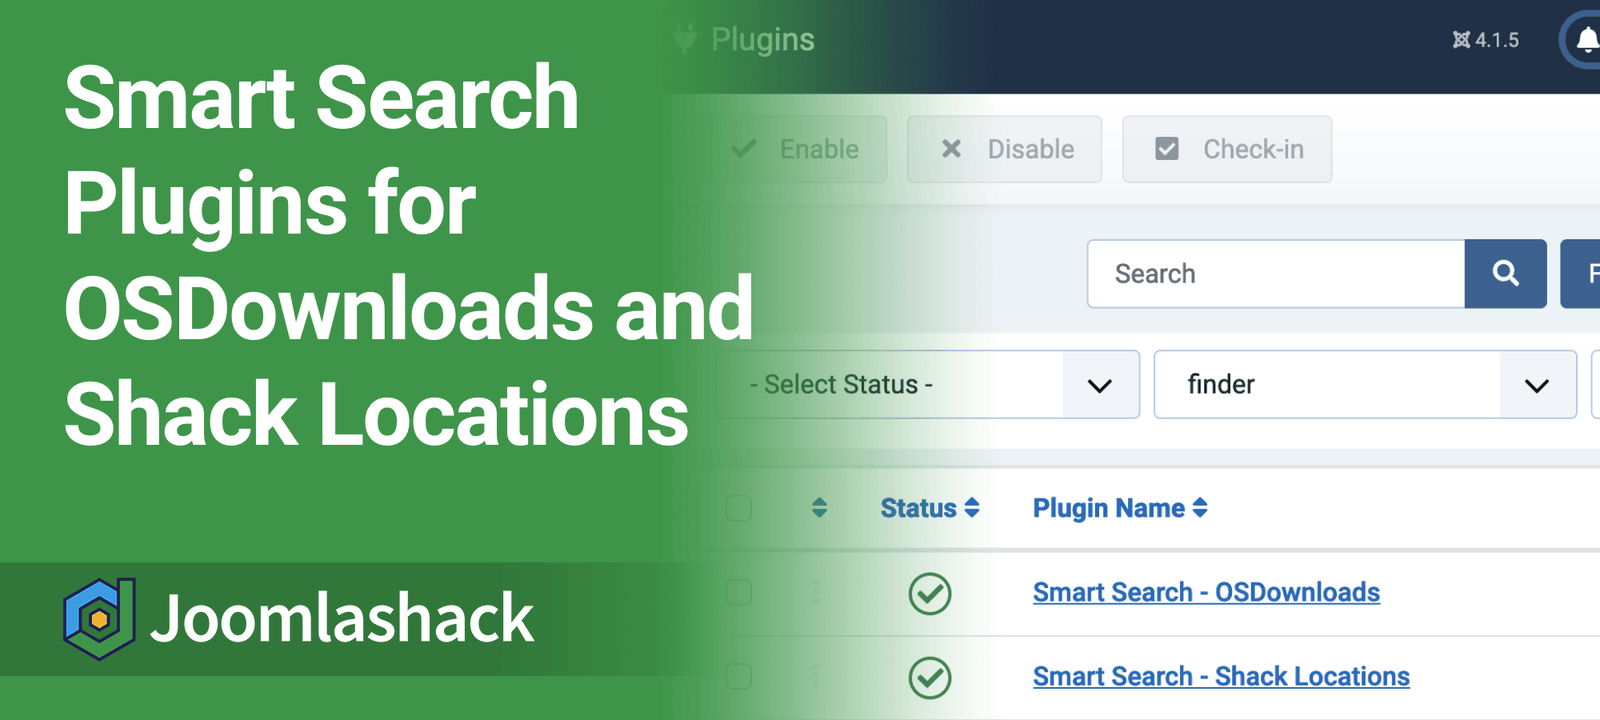 Smart Search Plugins for OSDownloads and Shack Locations